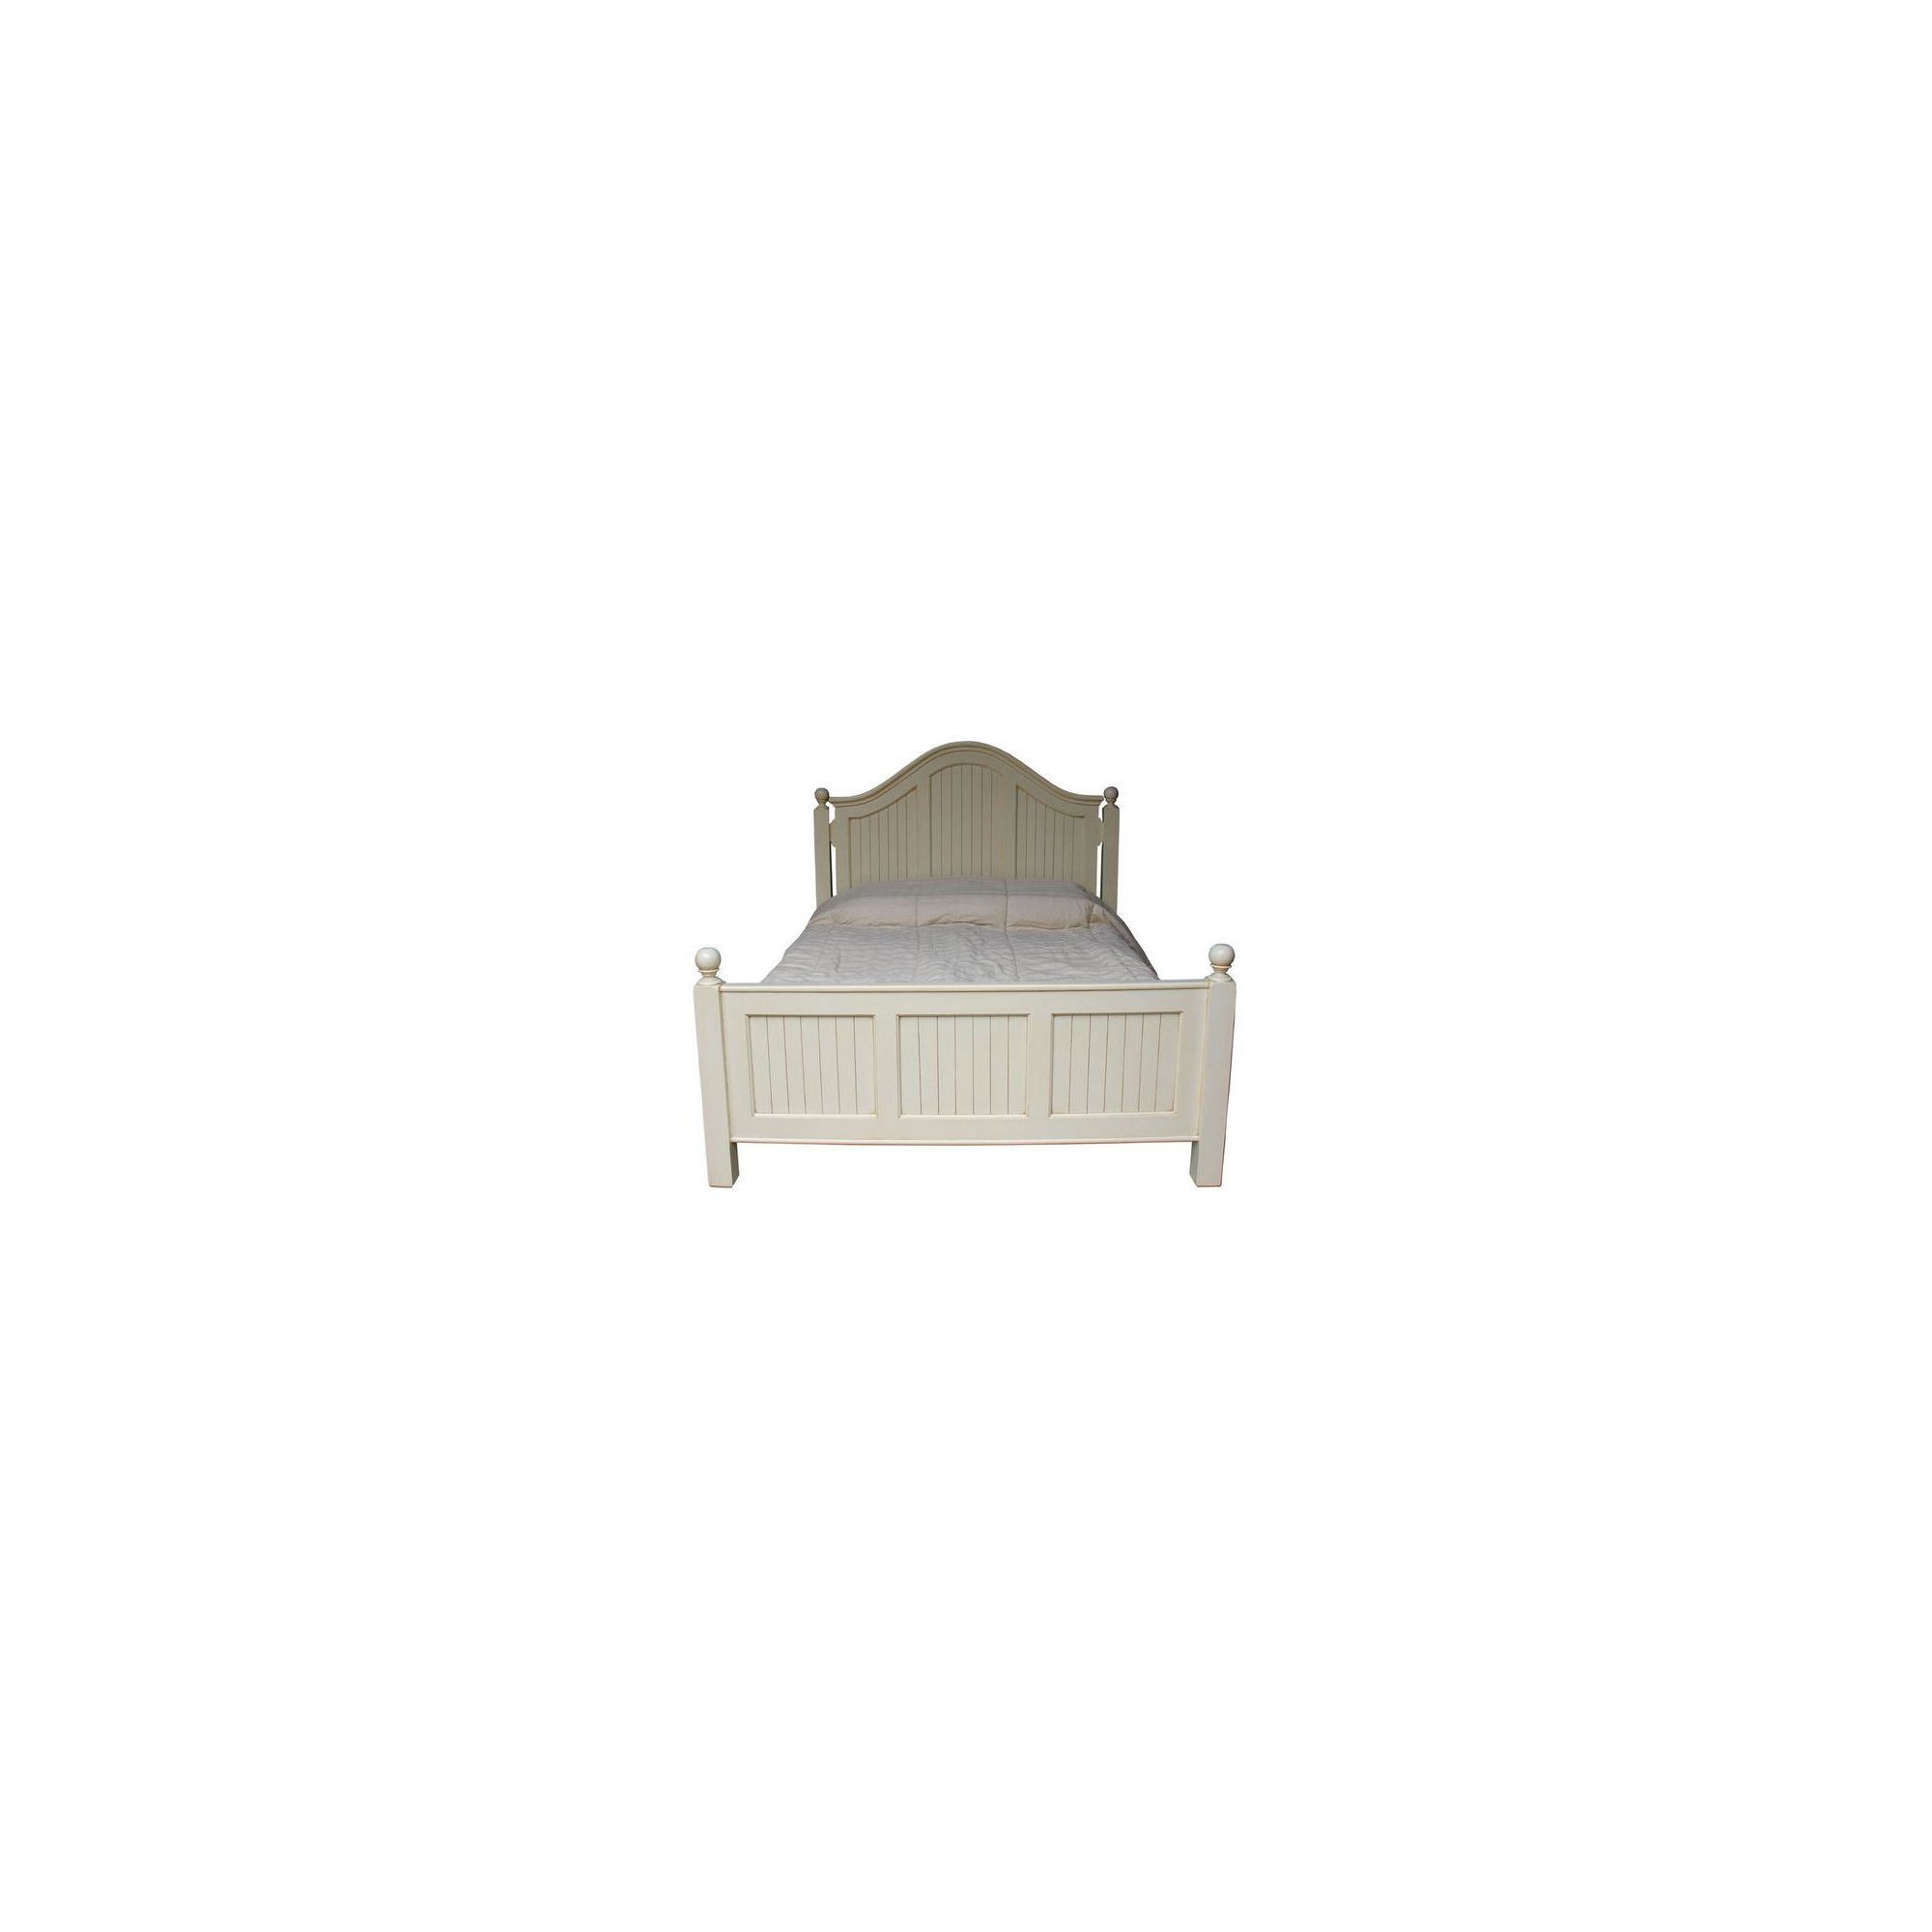 Lock stock and barrel Mahogany Arch Bed in Mahogany - Double - Antique White at Tesco Direct